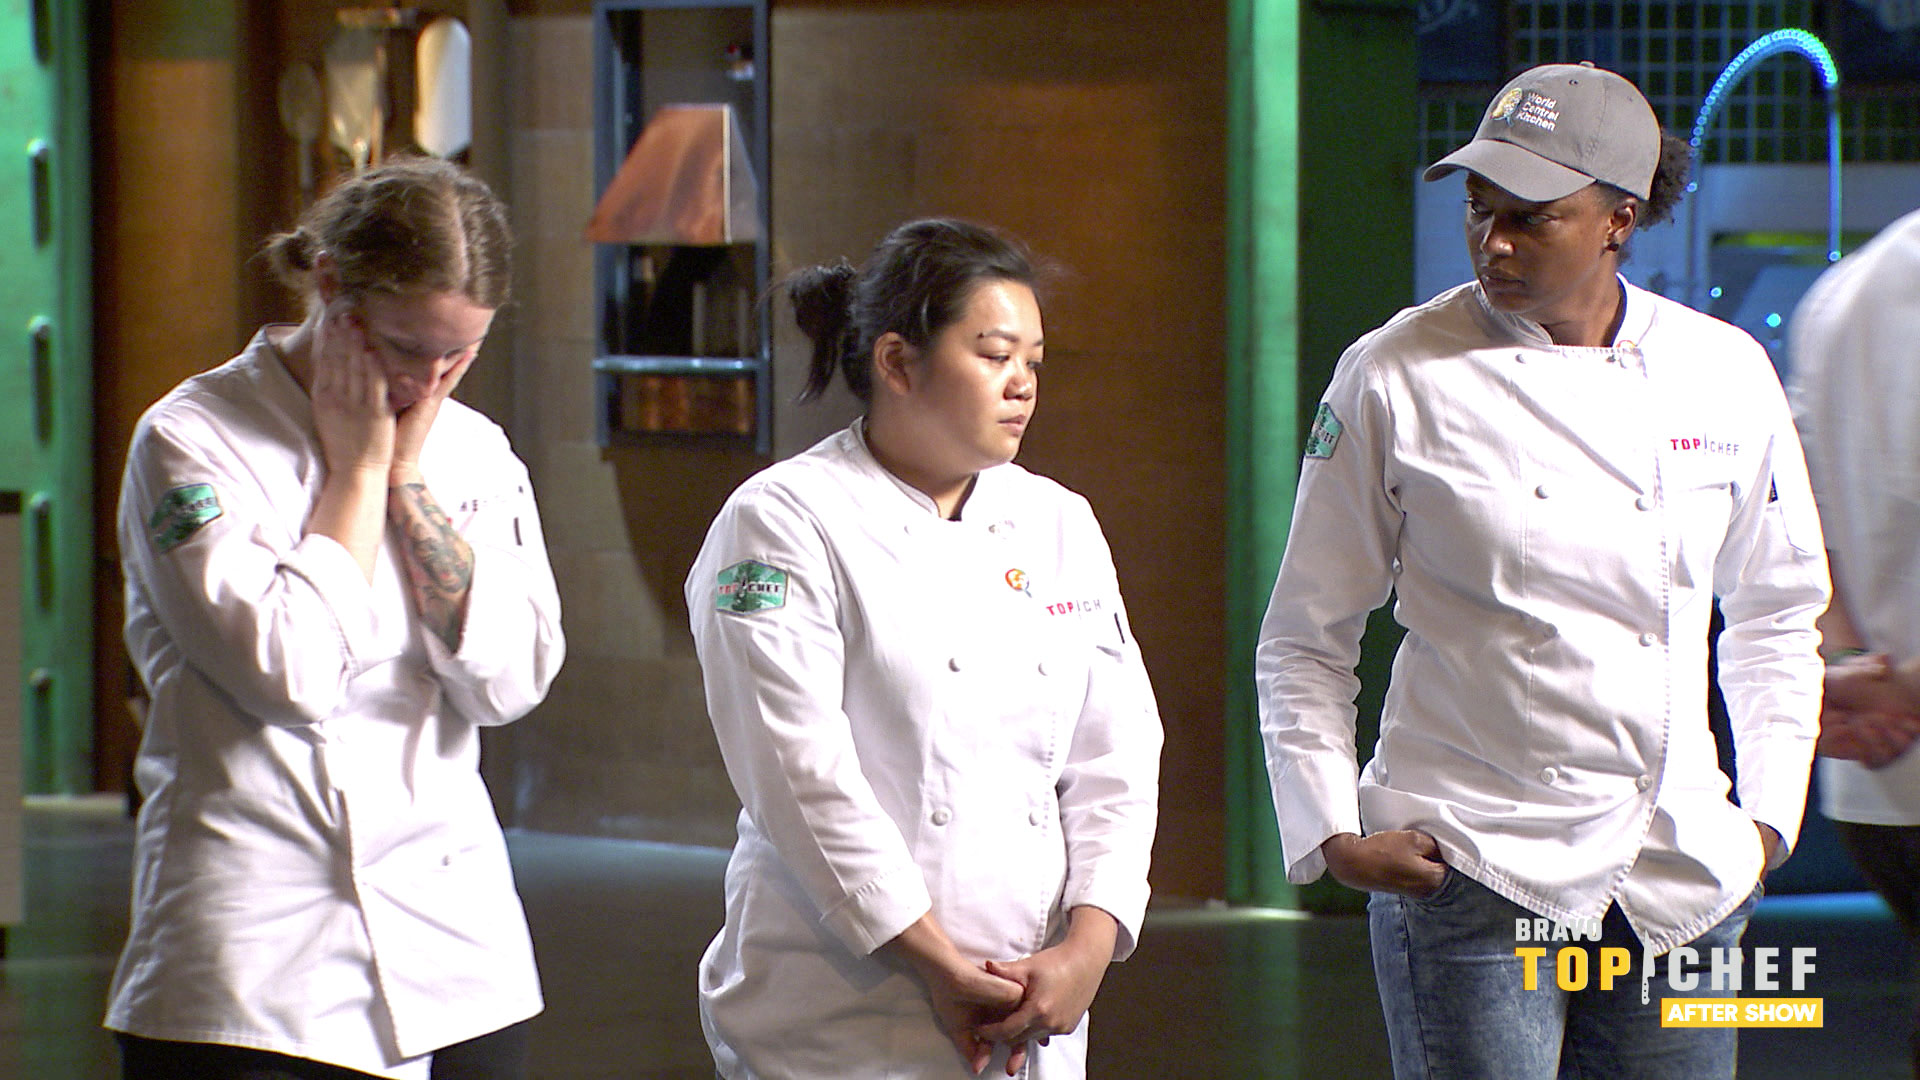 Top Chef Season 18 Contestant Gets Emotional Reflecting on Their Restaurant Wars Elimination